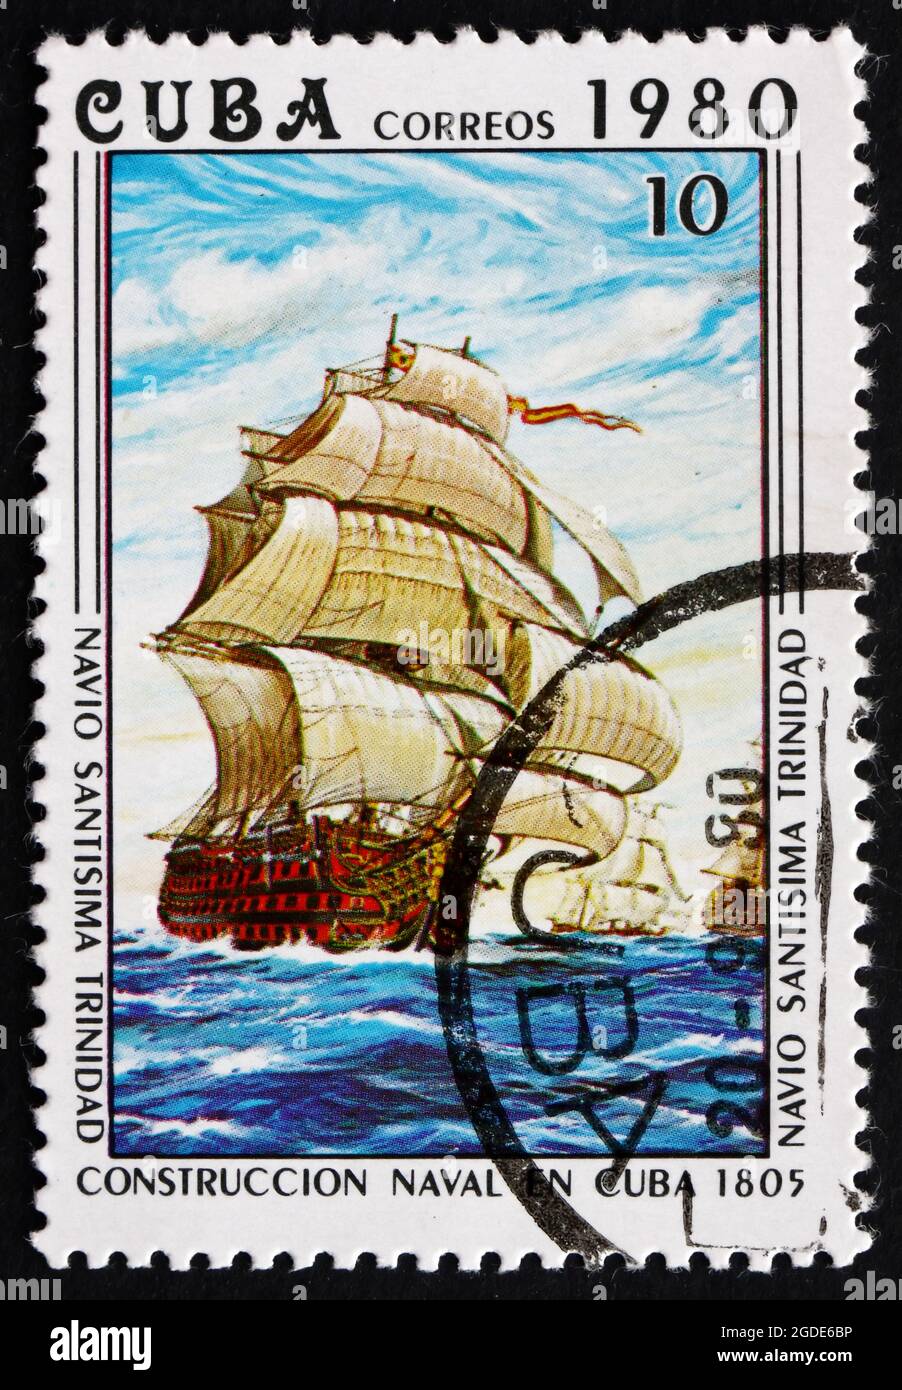 CUBA - CIRCA 1980: a stamp printed in the Cuba shows Santisima Trinidad, 1805, Ship under Construction, Construction of Naval Vessels in Cuba, 360th A Stock Photo